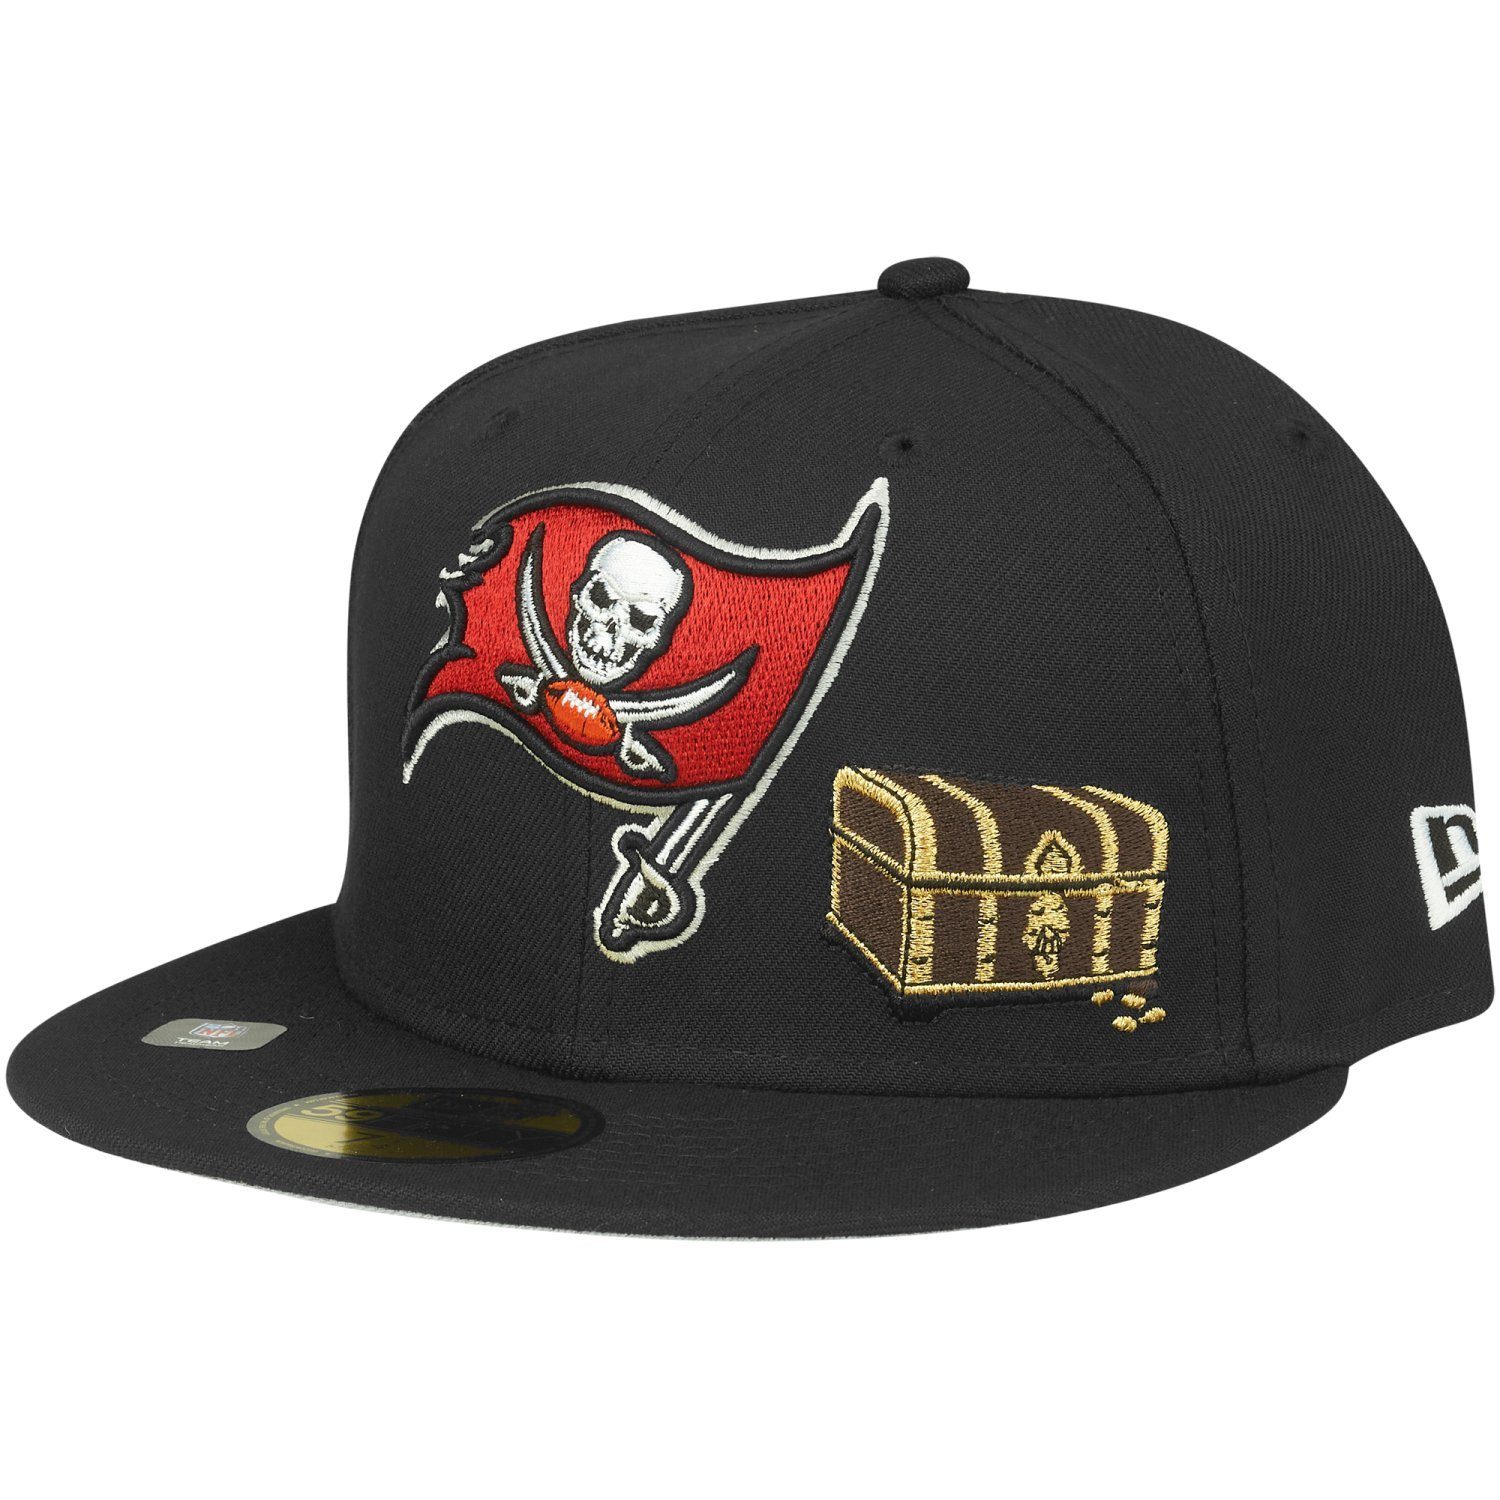 New Era Fitted Cap Bay Tampa Buccaneers CITY NFL 59Fifty